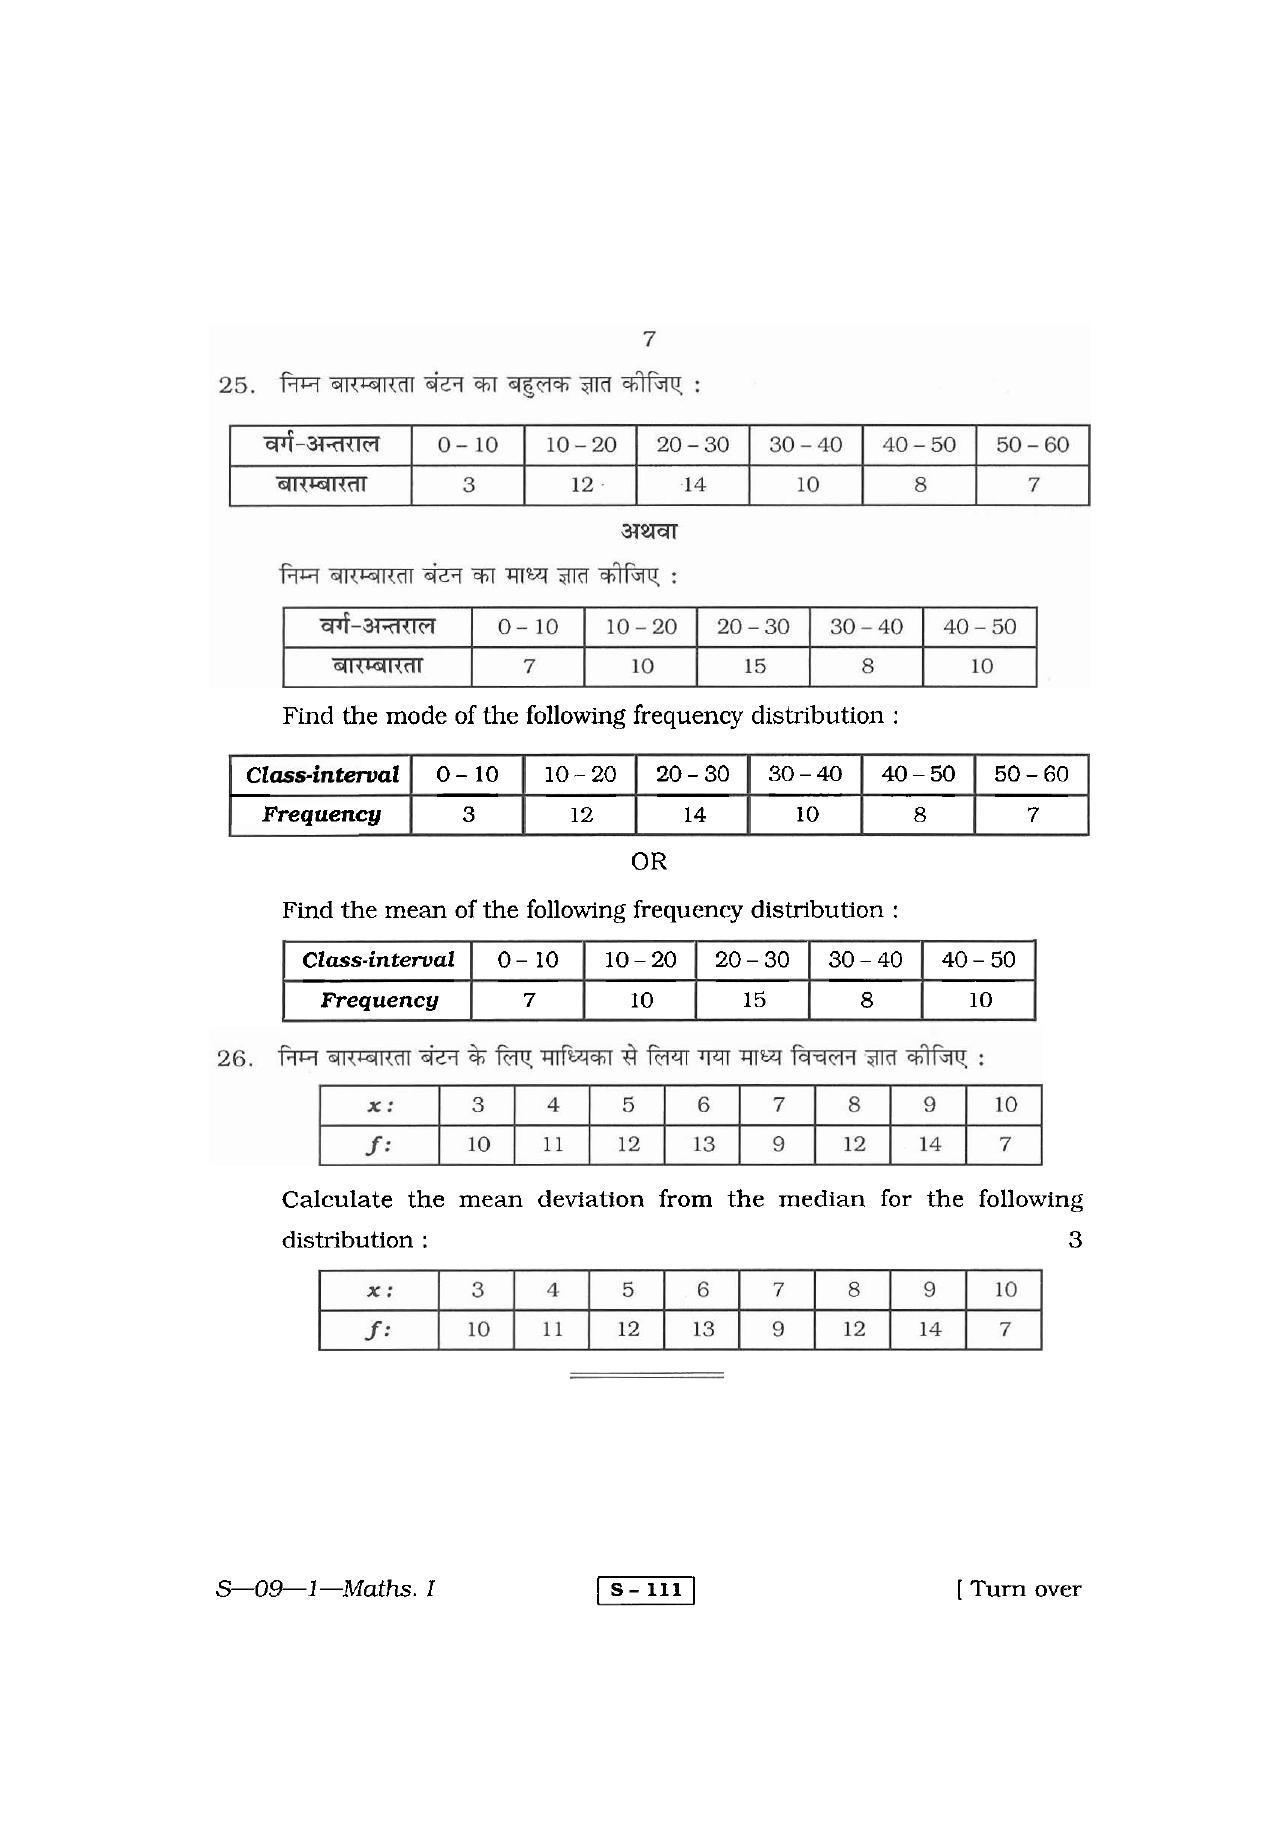 RBSE Class 10 Mathematics  – I 2011 Question Paper - Page 7